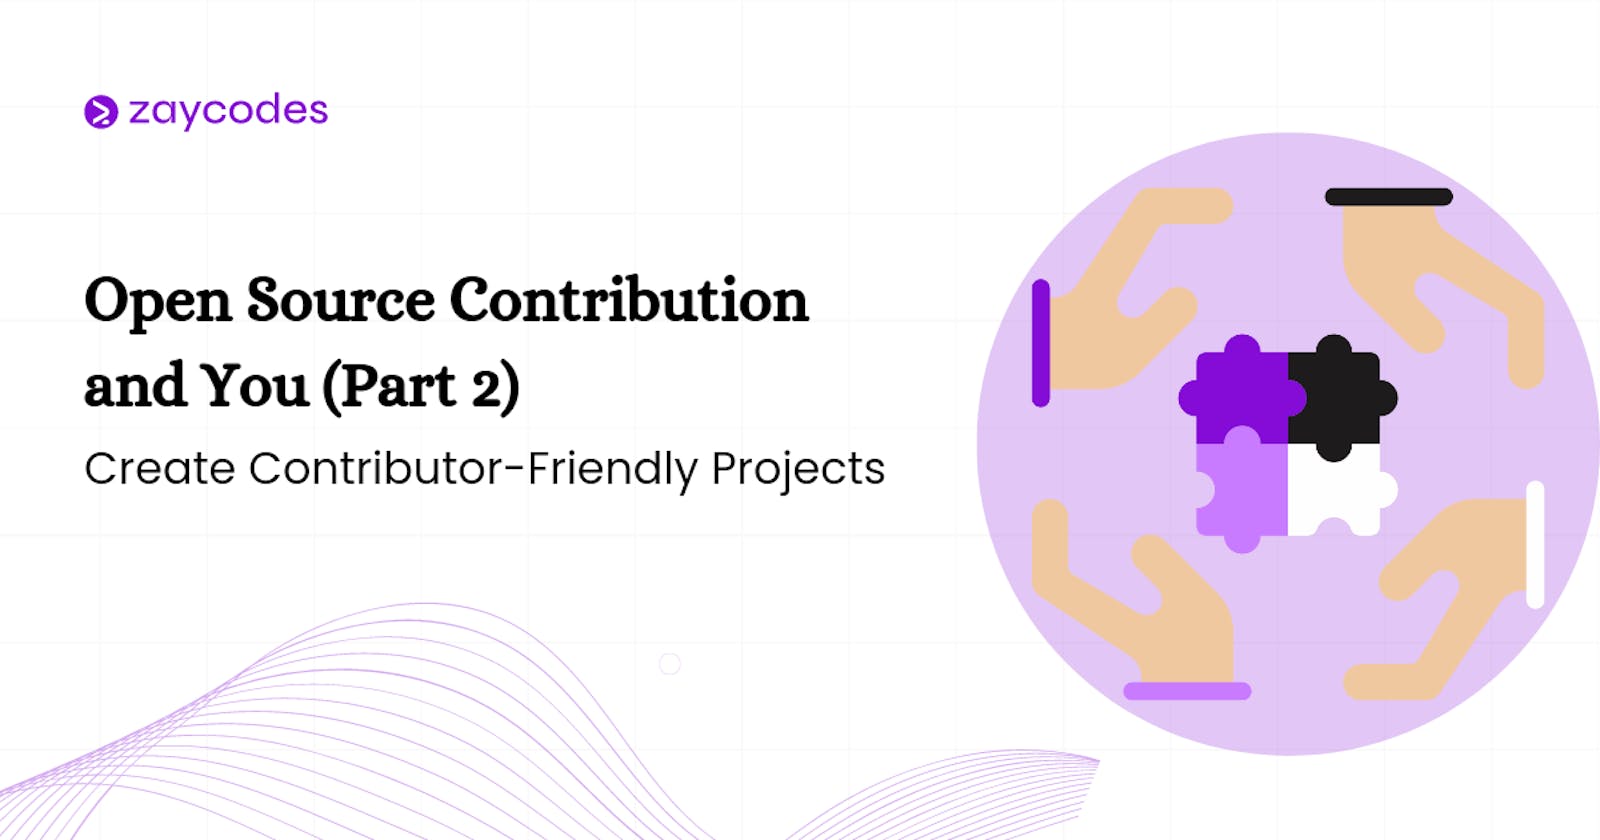 Open Source Contribution and You (Part 2): Create Contributor-Friendly Projects